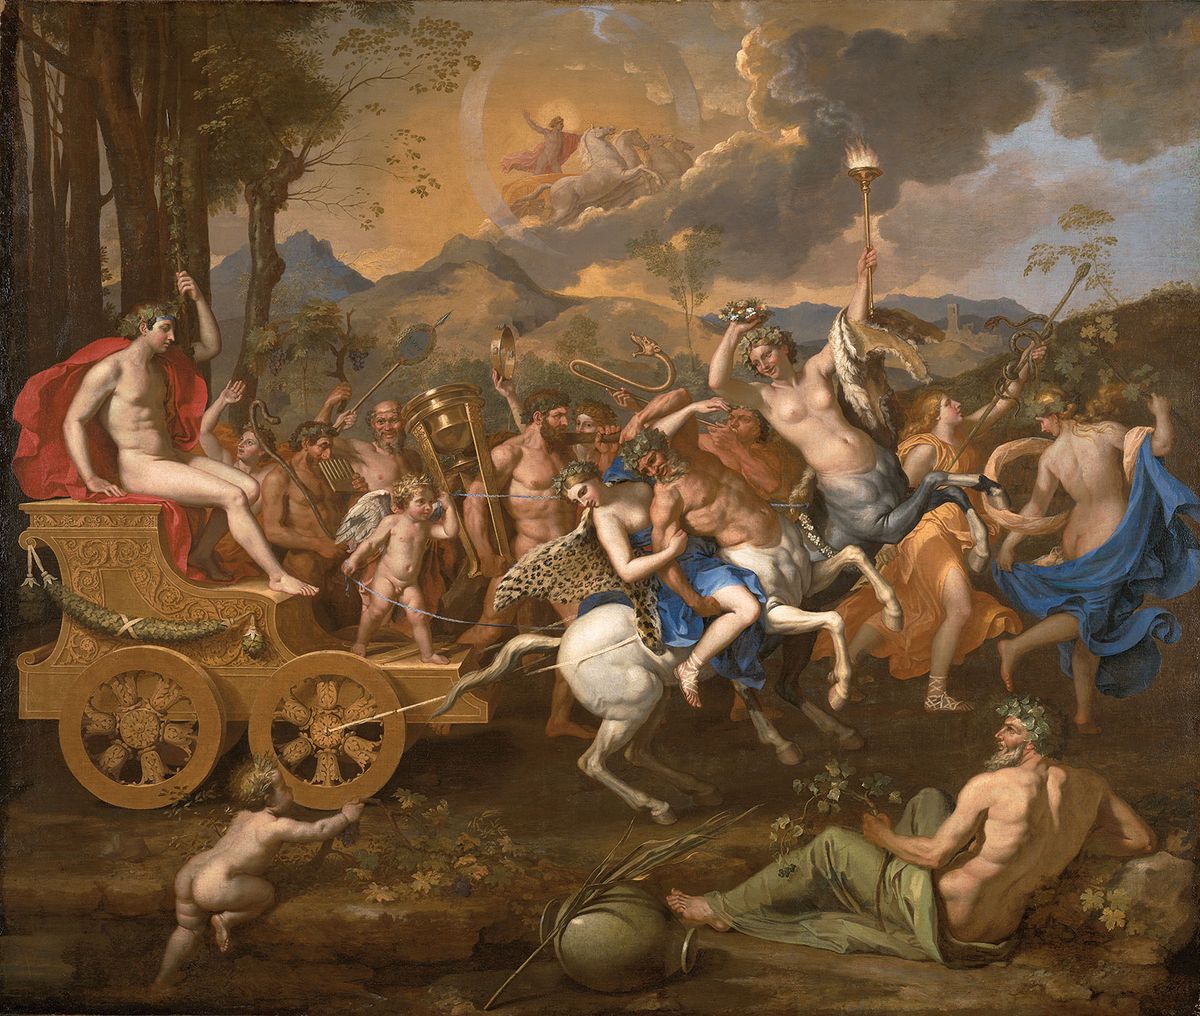 Nicolas Poussin’s The Triumph of Bacchus (1635-36) will be on loan from the Nelson-Atkins Museum of Art in Kansas City Photo: © John Lamberton; courtesy of Nelson-Atkins Museum of Art, Media Services